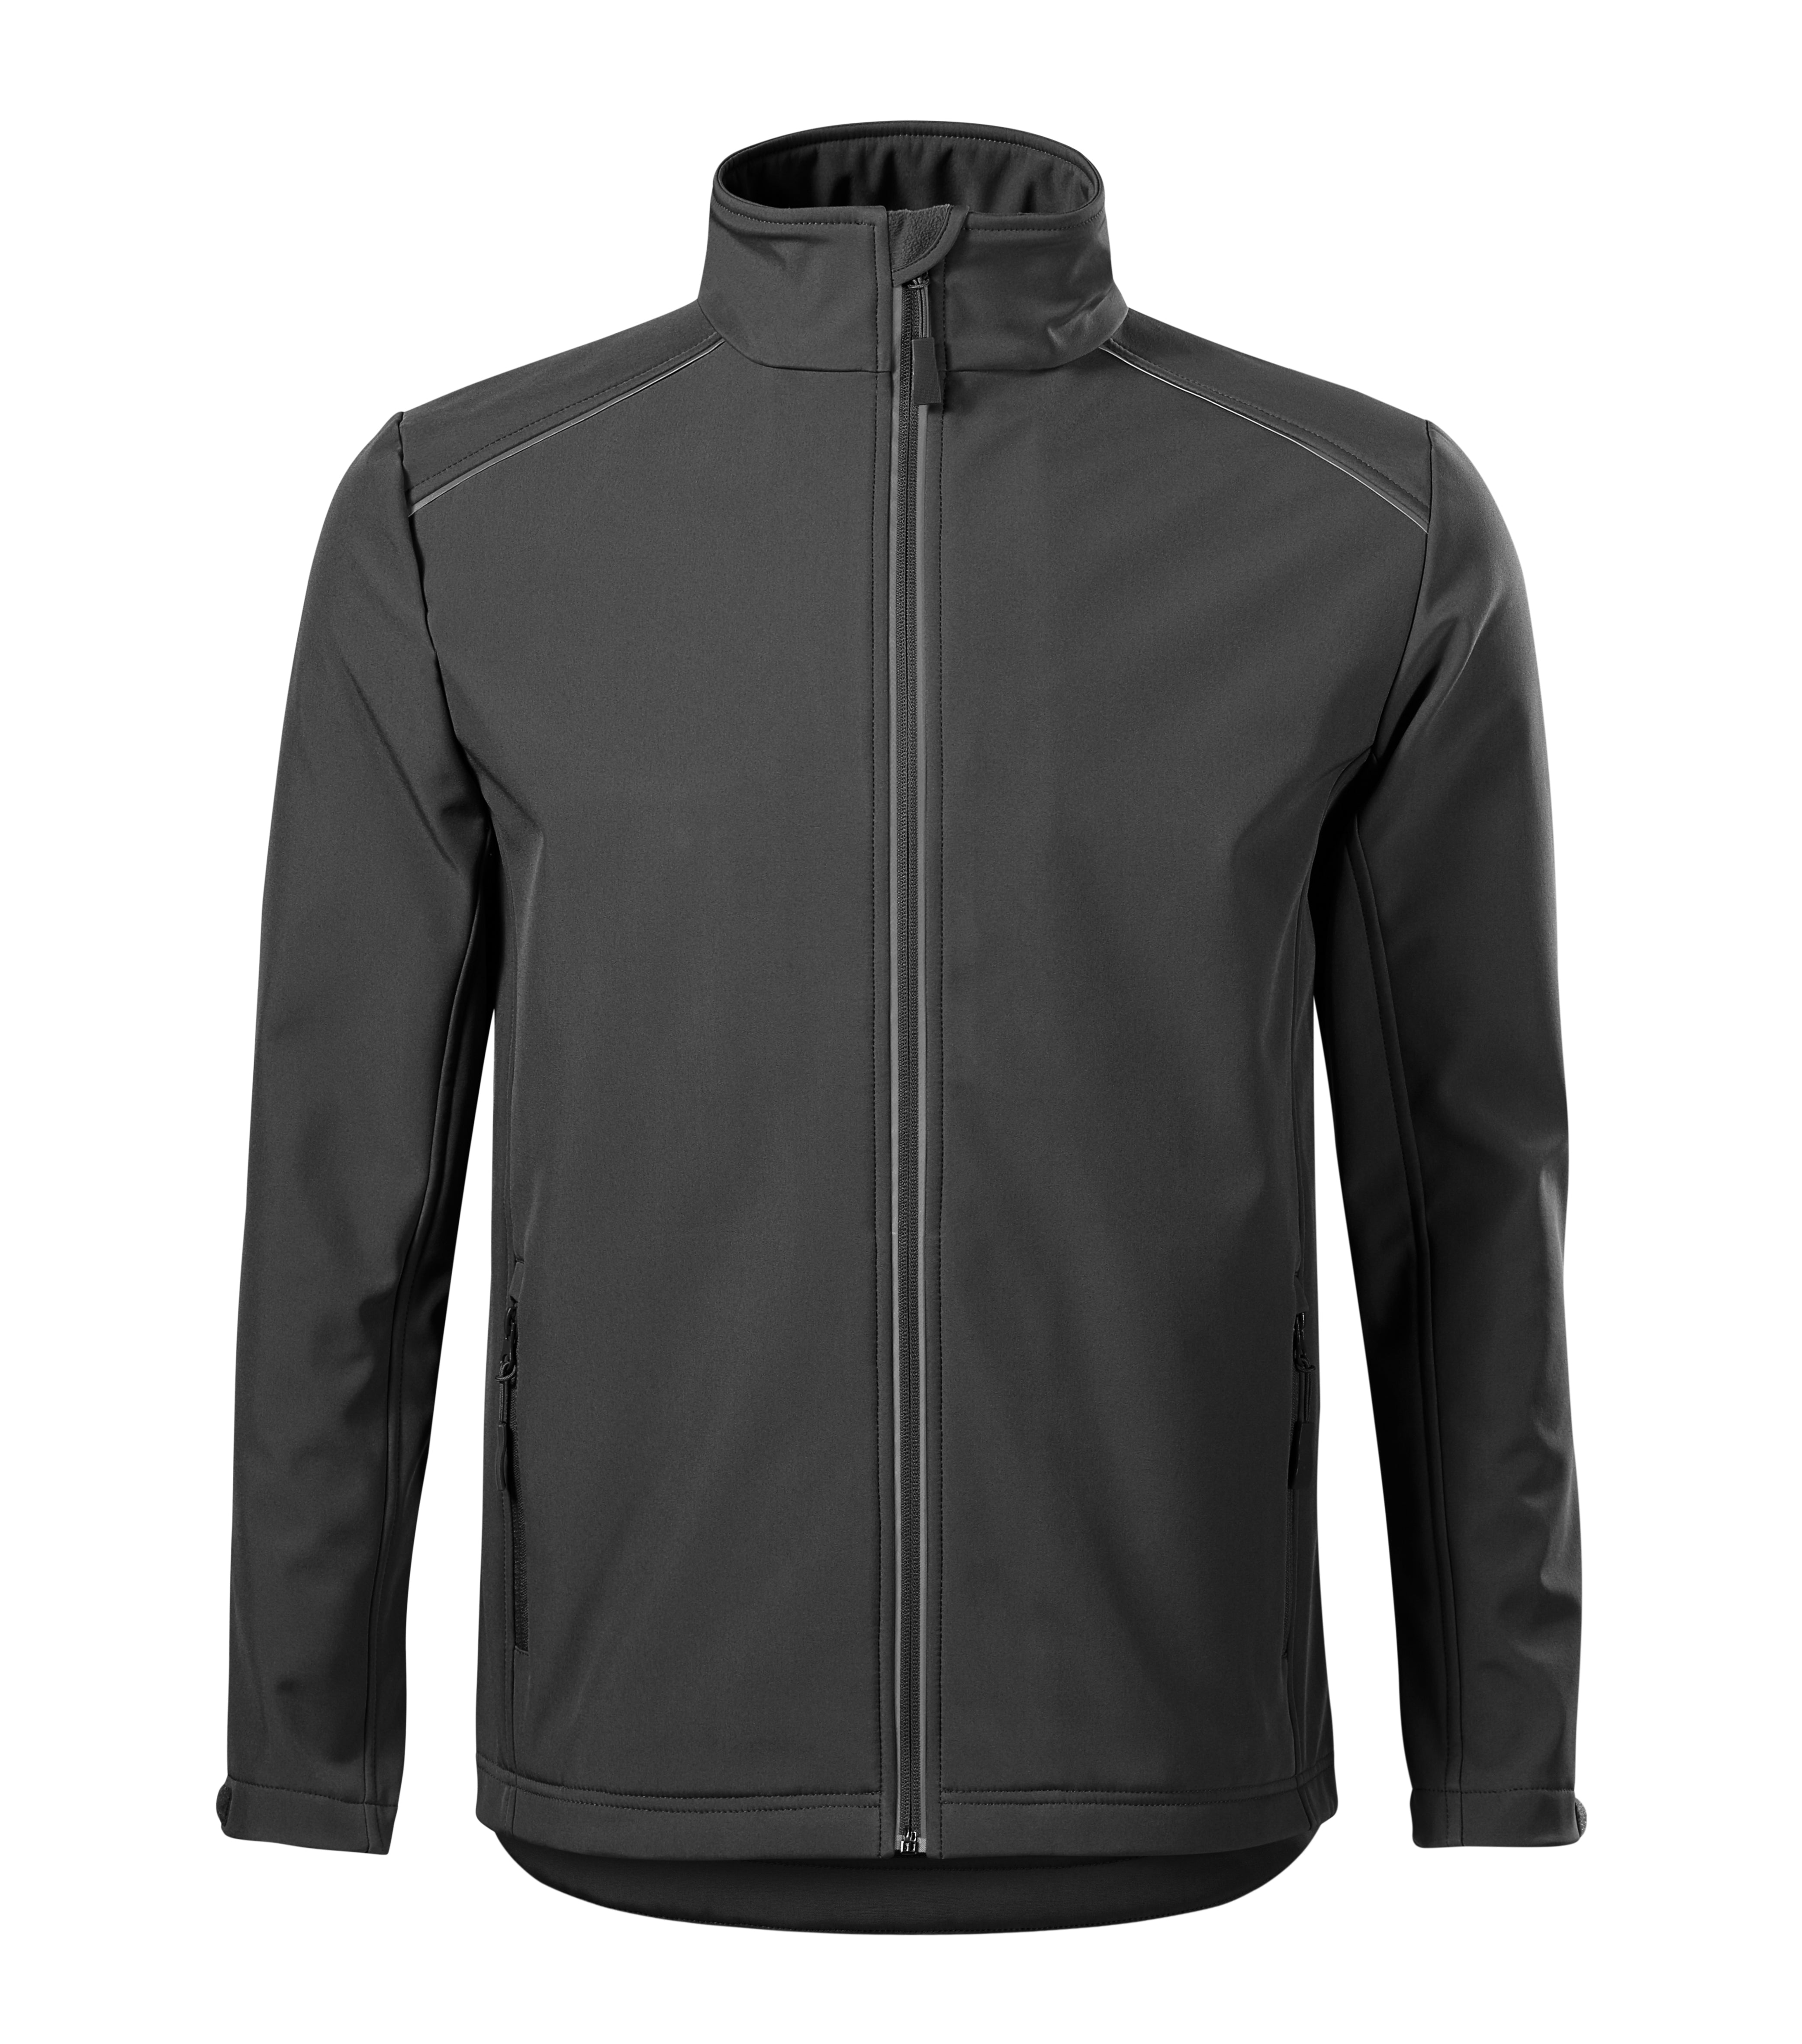 Valley soft shell jacket